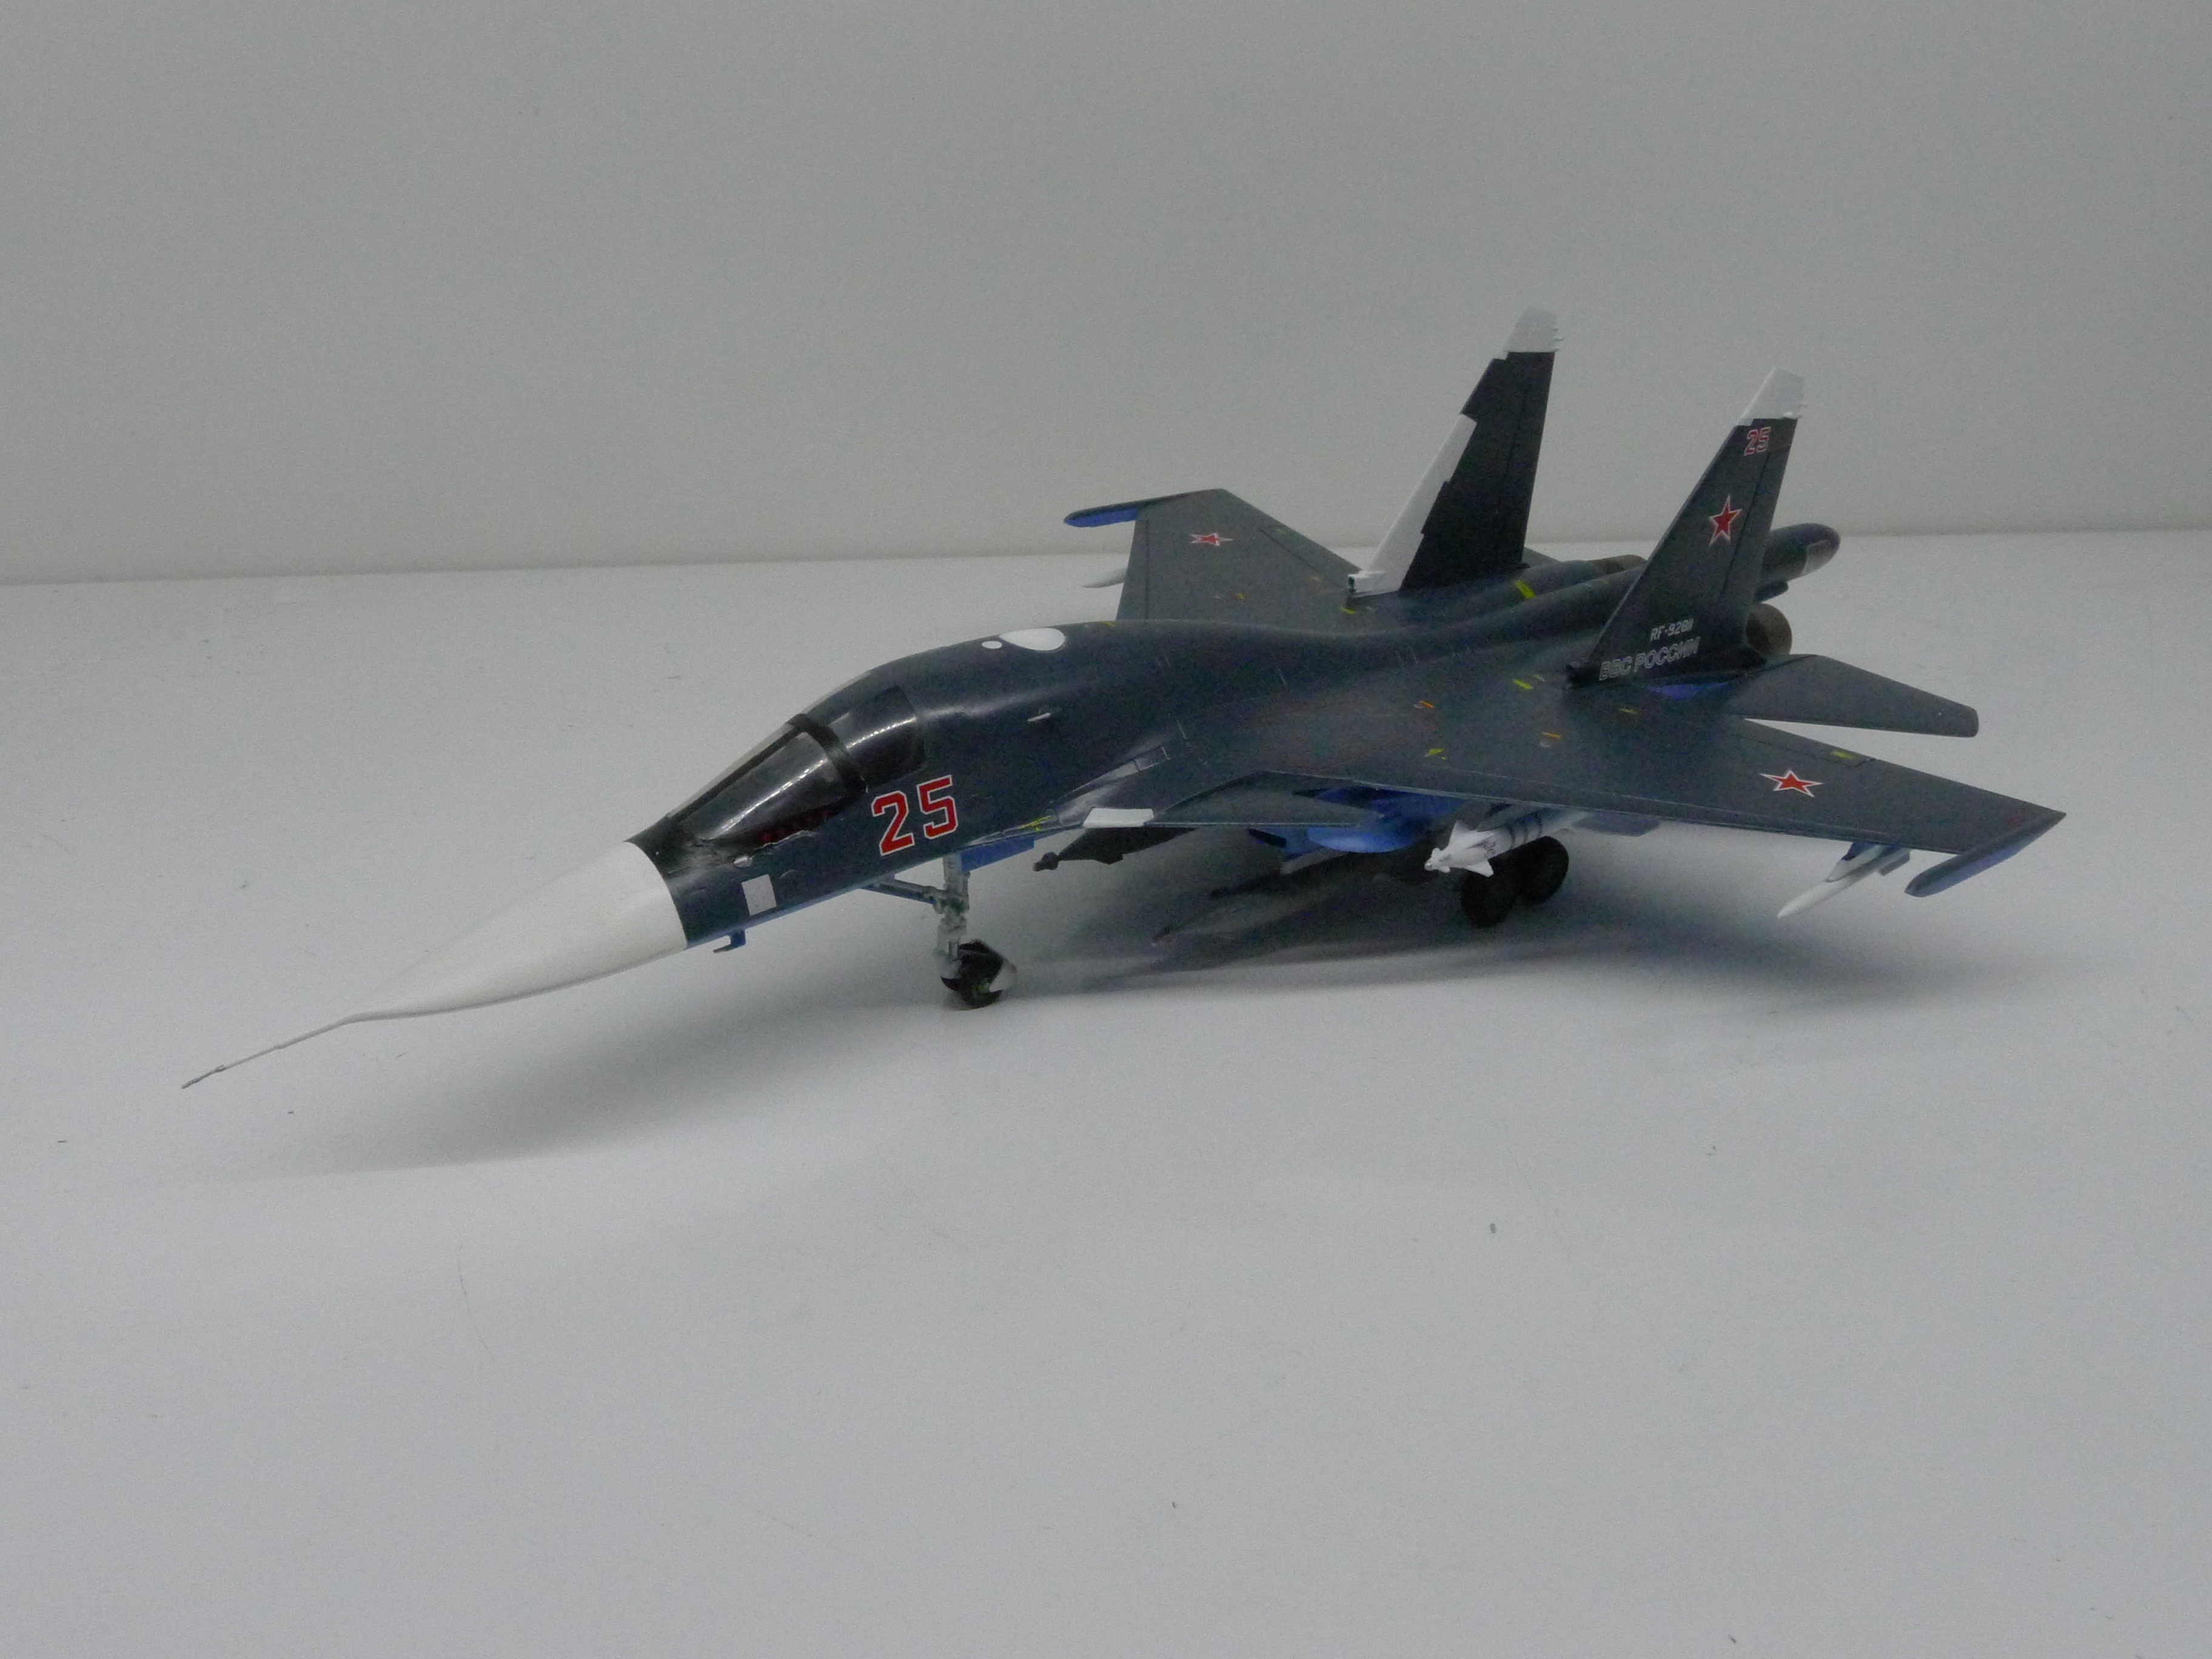        -34  1:72,   28 . ,  .  Model Russian front-line aircraft, the Su-34. Scale 1:72, hand made. # 6 hobbyplus.ru